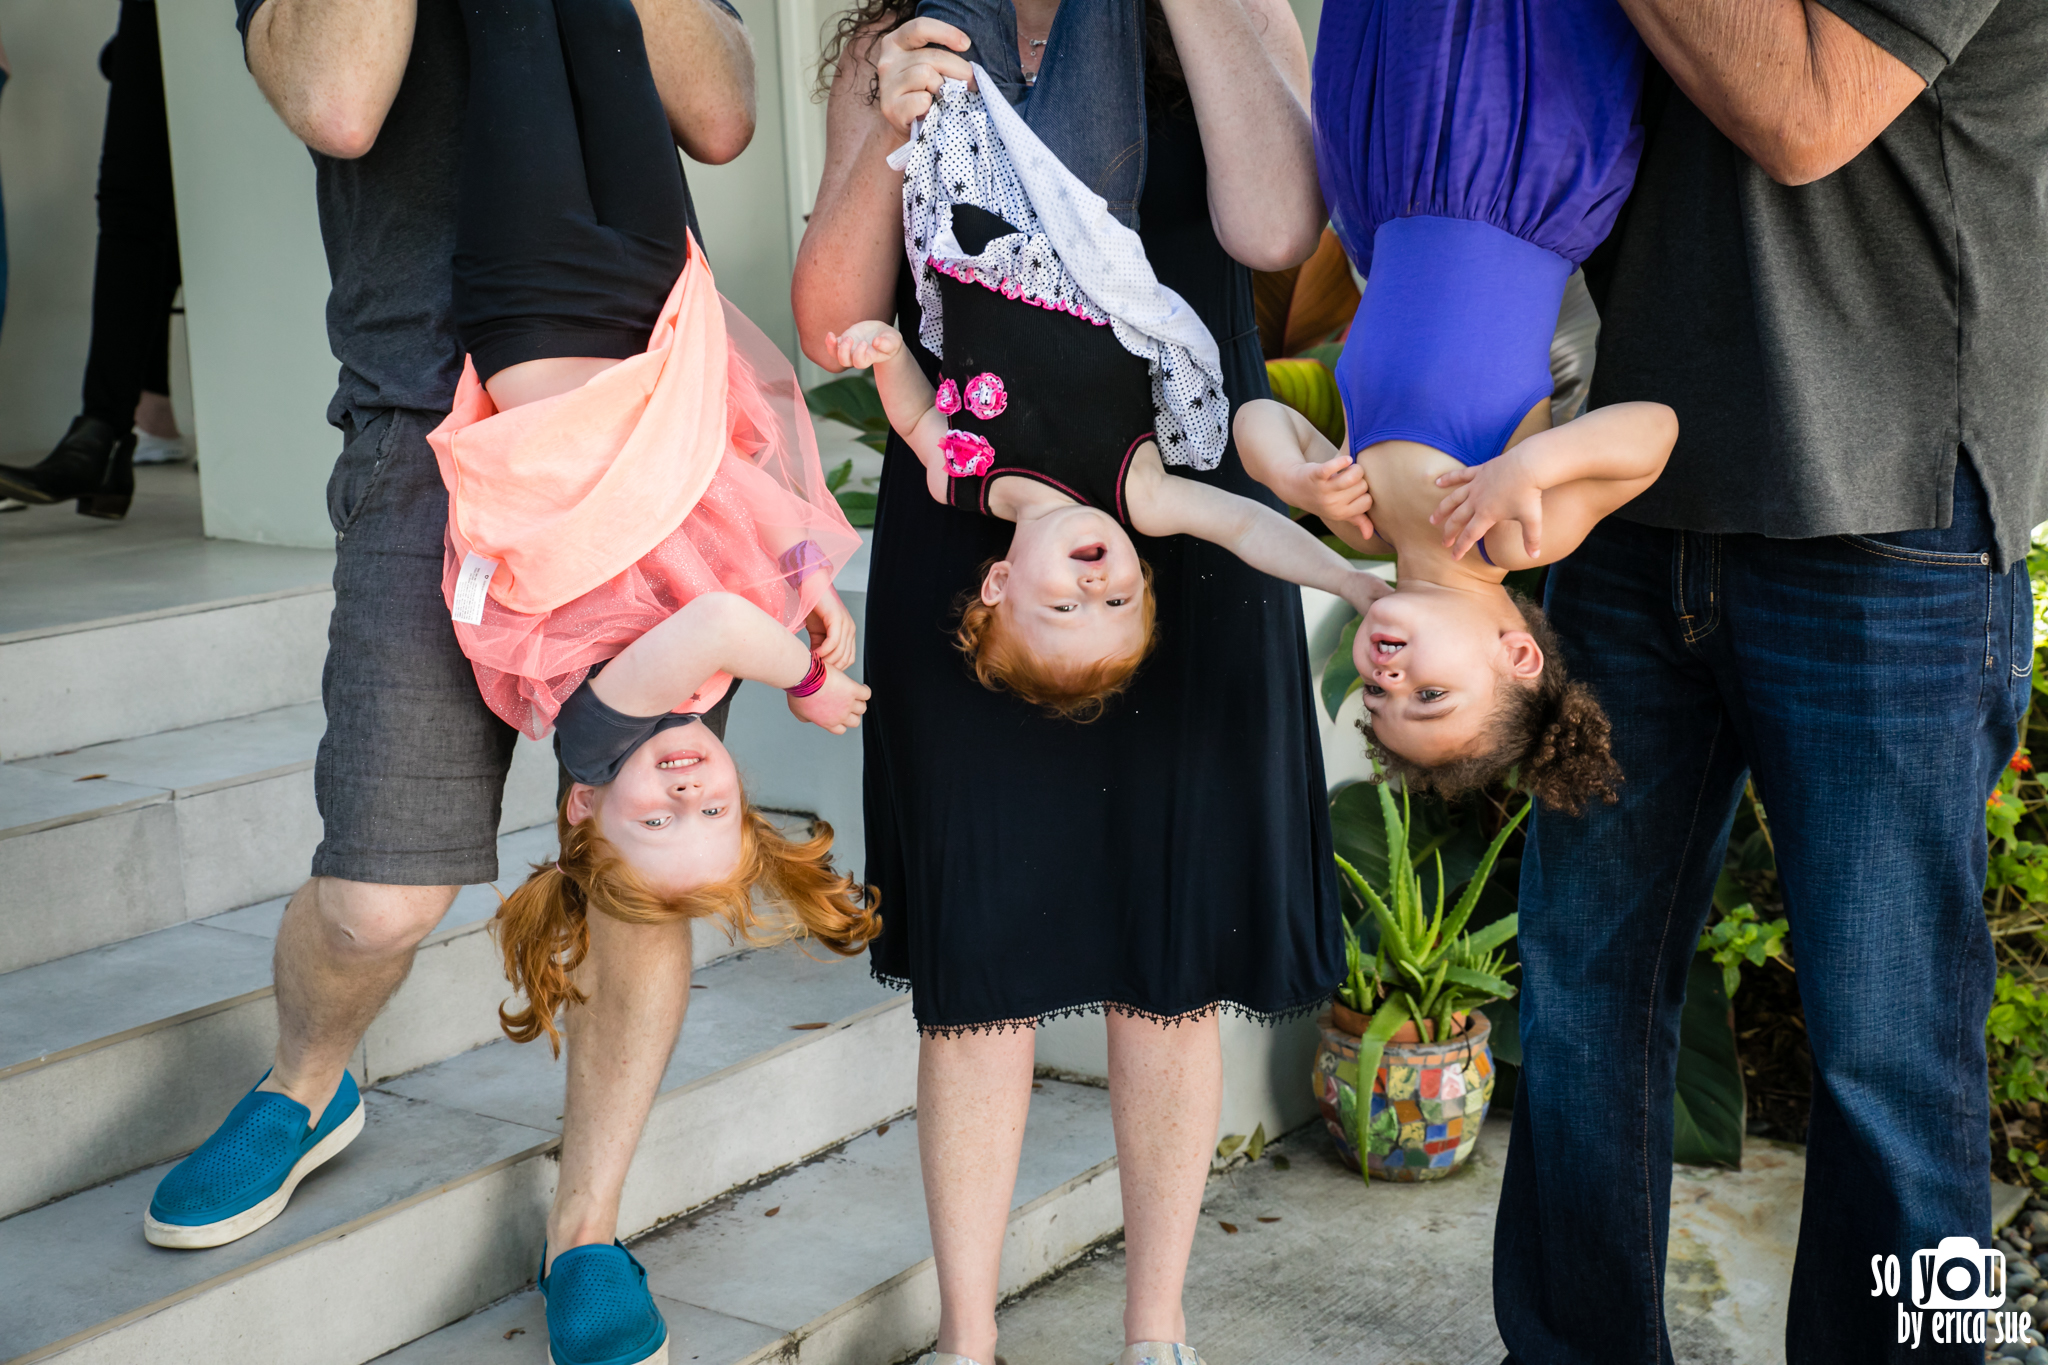 family-photography-so-you-by-erica-sue-ft-lauderdale-fl-florida-trolls-movie-birthday-party-2869.jpg